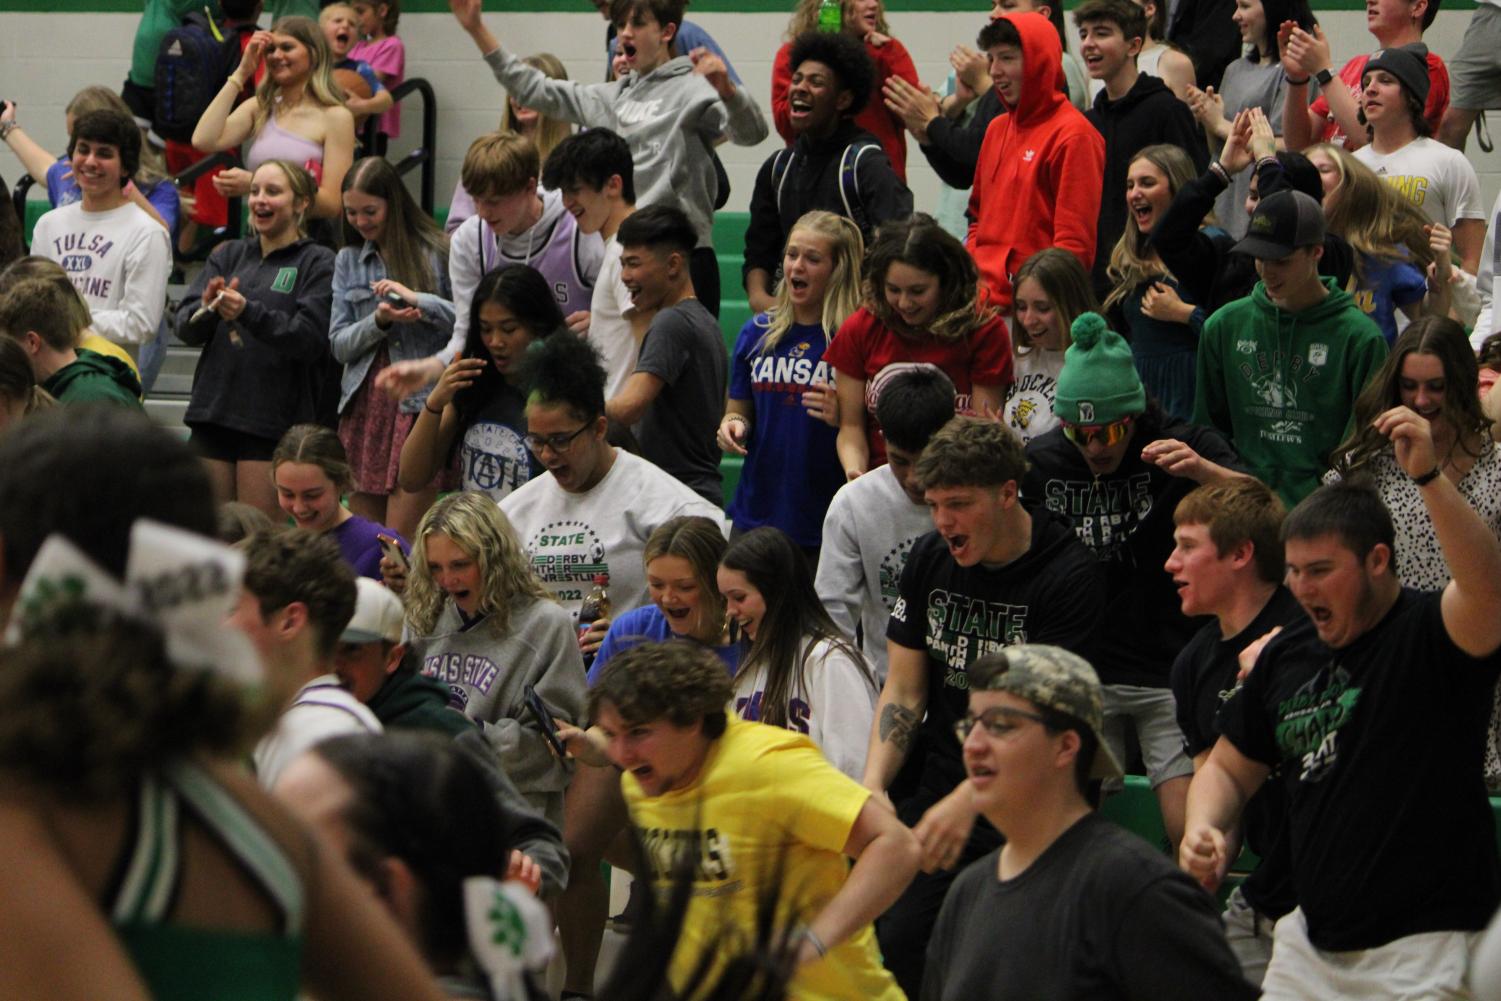 3%2F2%2F22+Boys+basketball+game+vs.+Campus+%28Photos+by+Laurisa+Rooney%29